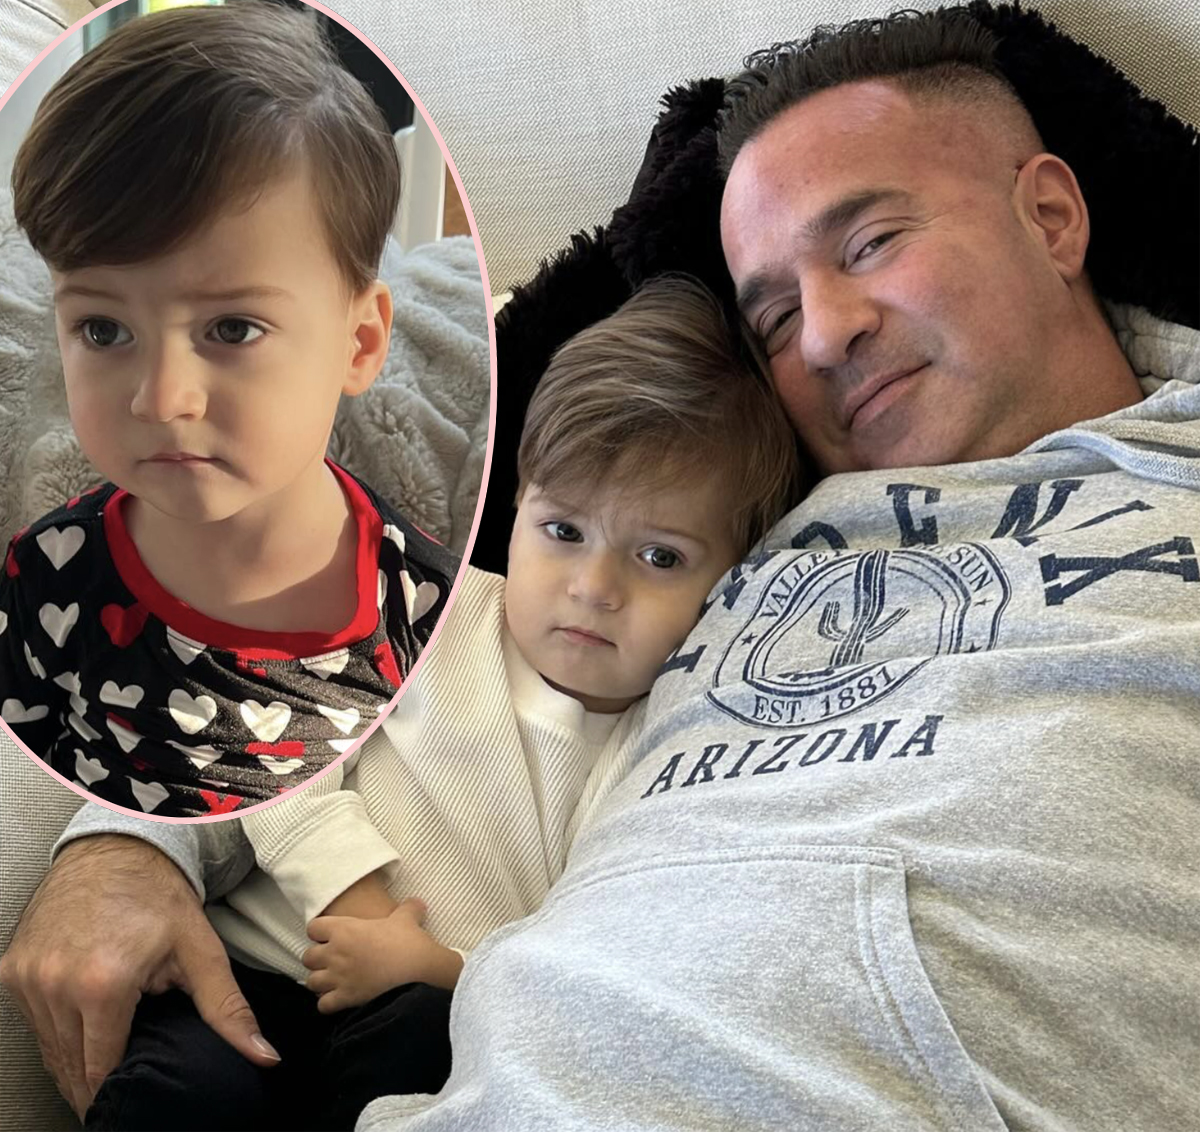 #Mike ‘The Situation’ Sorrentino & Wife Lauren Rush To Save 2-Year-Old Son Romeo’s Life In Horrifying Choking Moment Caught On Video!